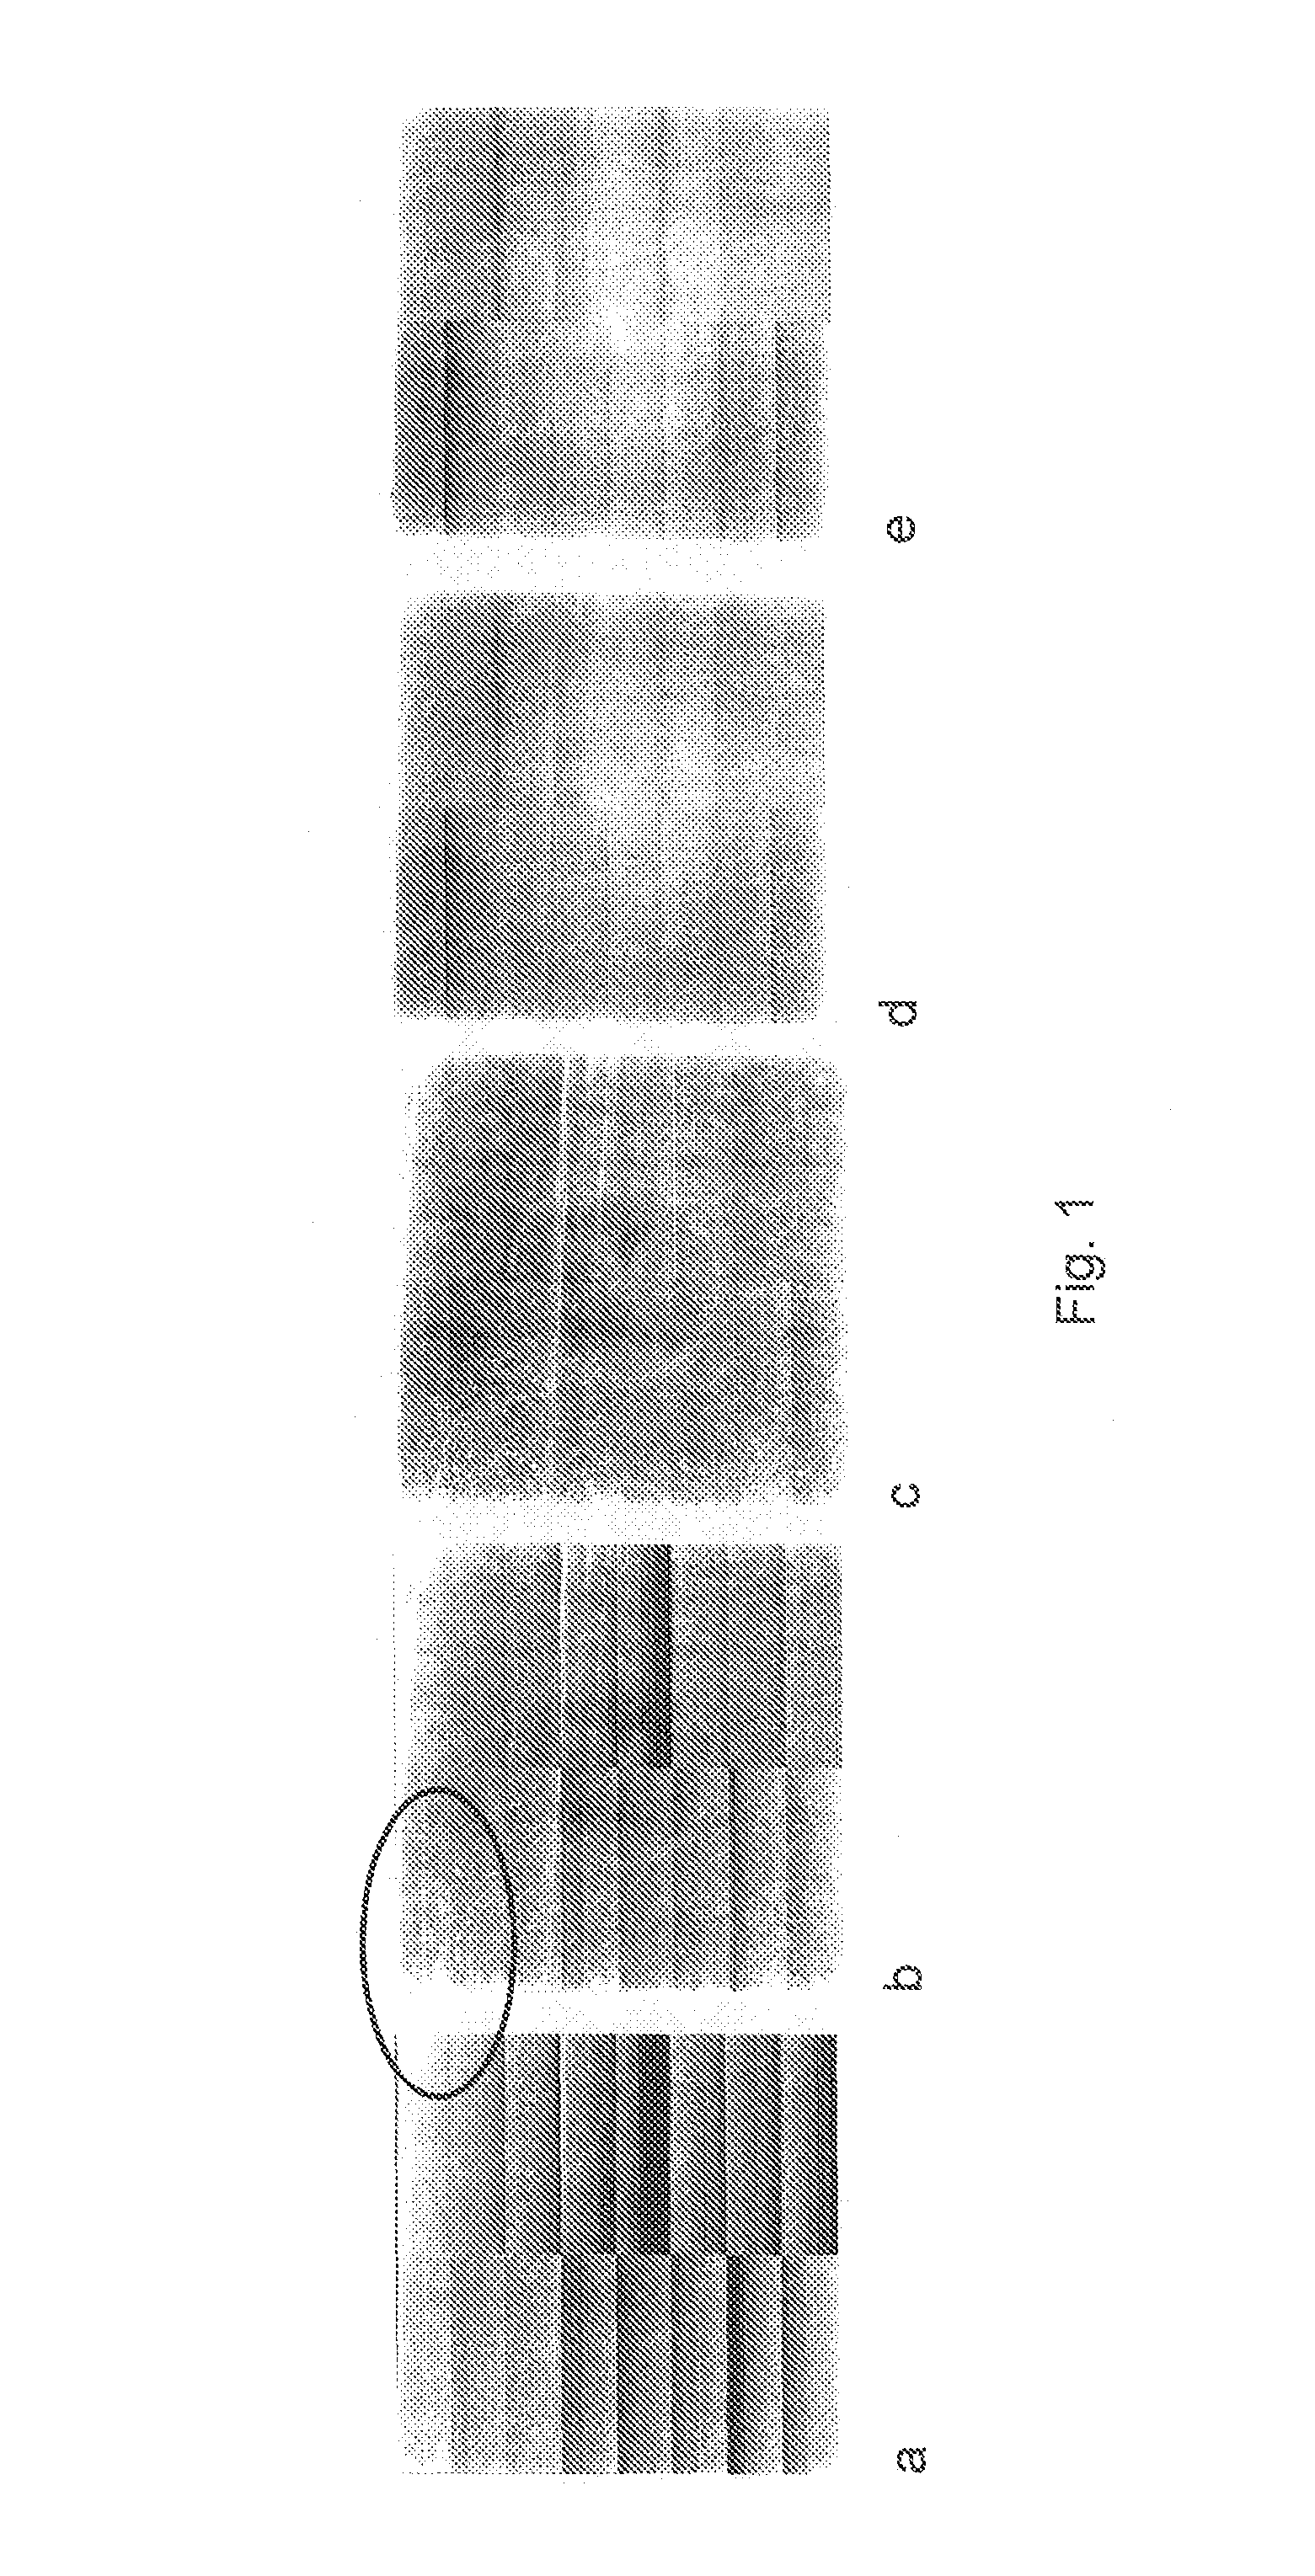 Estimating an offset image of a new imaging device from the offset image of an aged imaging device